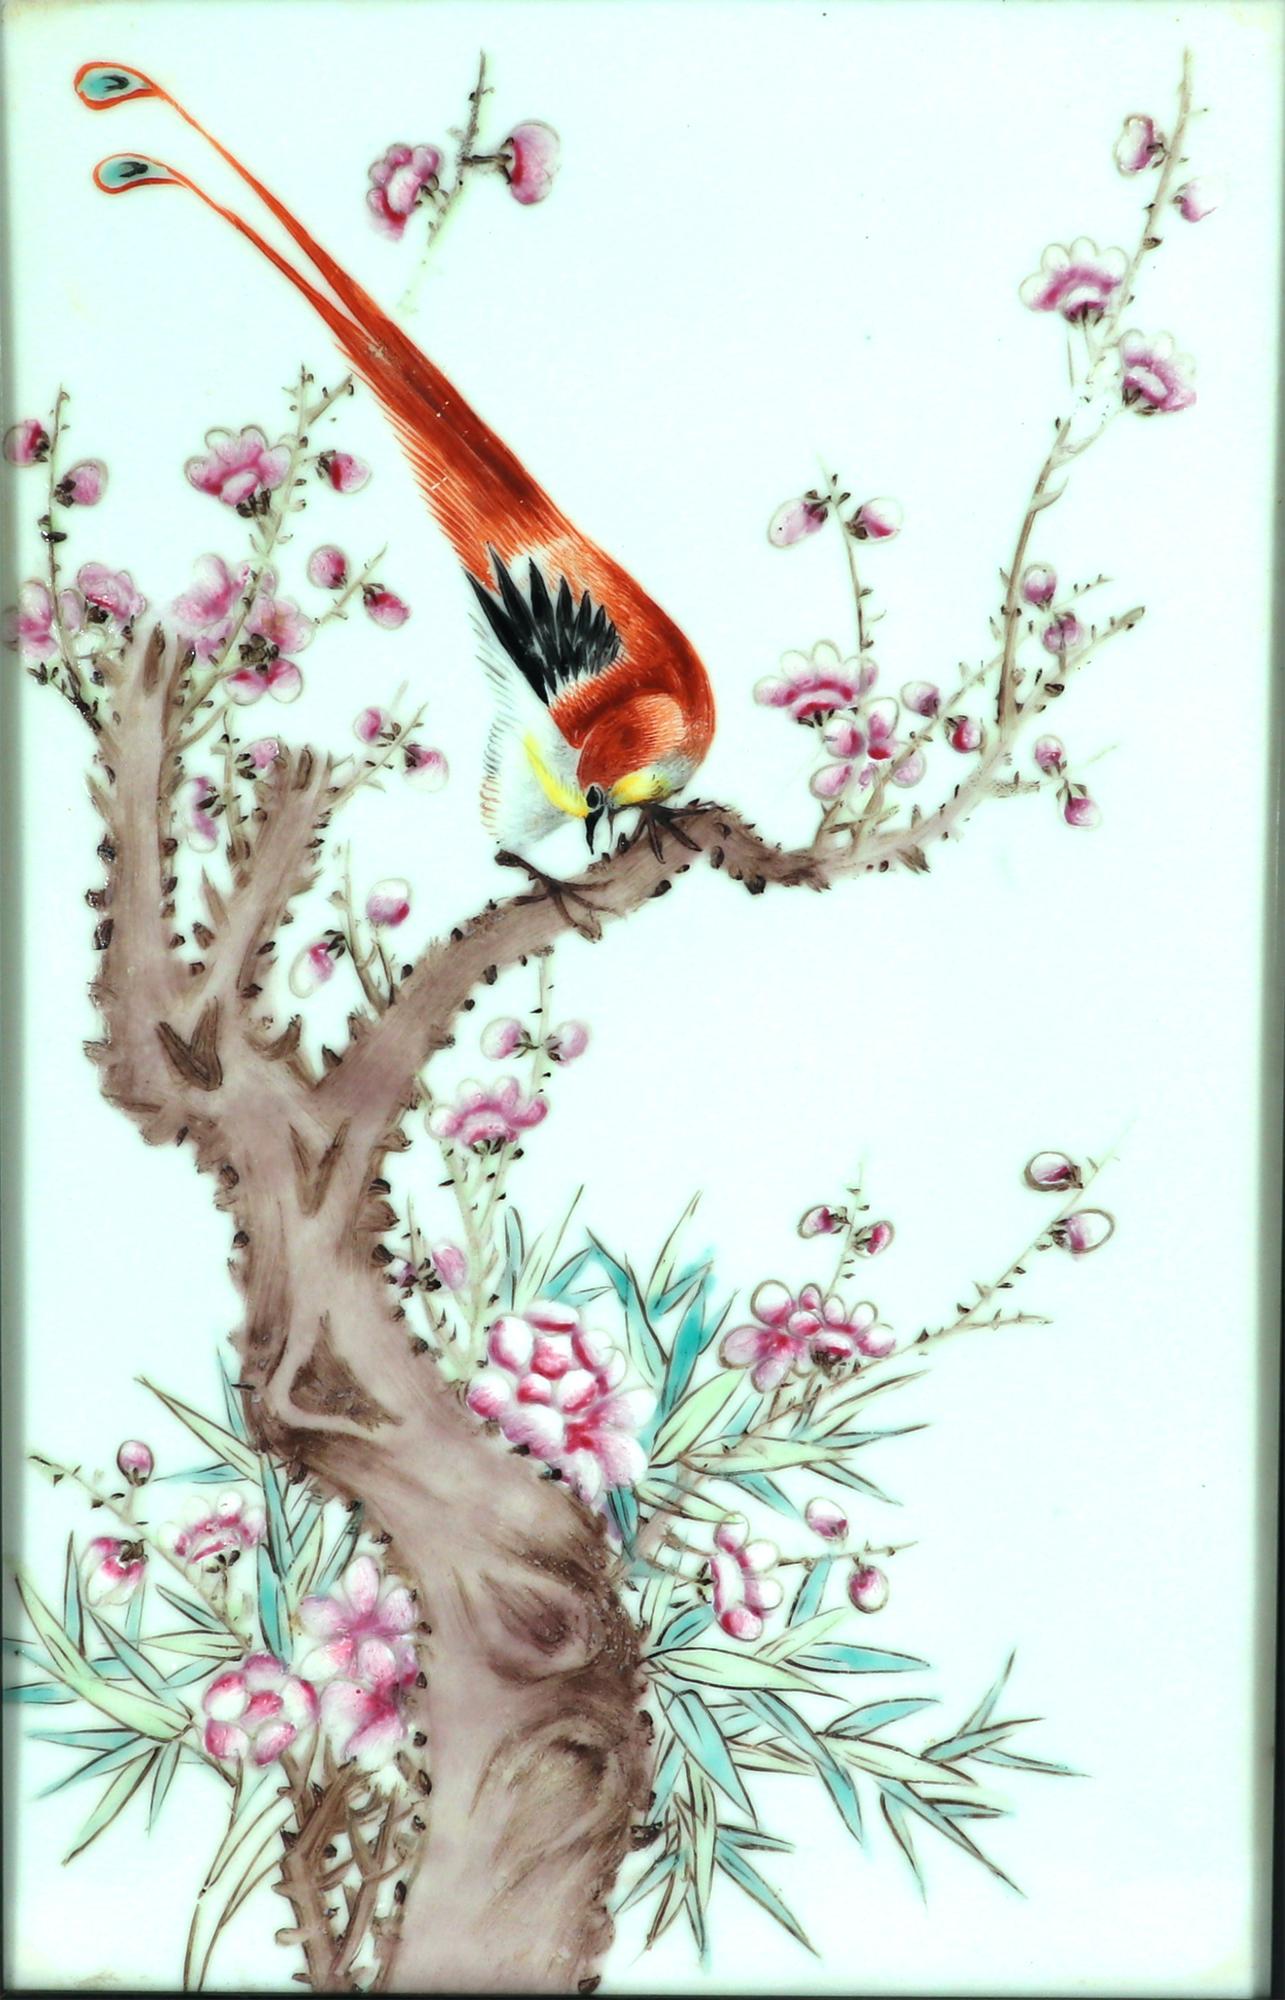 Chinese Porcelain Framed Famille Rose Plaque of Golden Pheasant on a Flowering Tree Branch,
20th Century,

The large porcelain plaque, in an upright format, depicts a large Golden Pheasant on a  flowering tree branch.  

All within a gilt and black